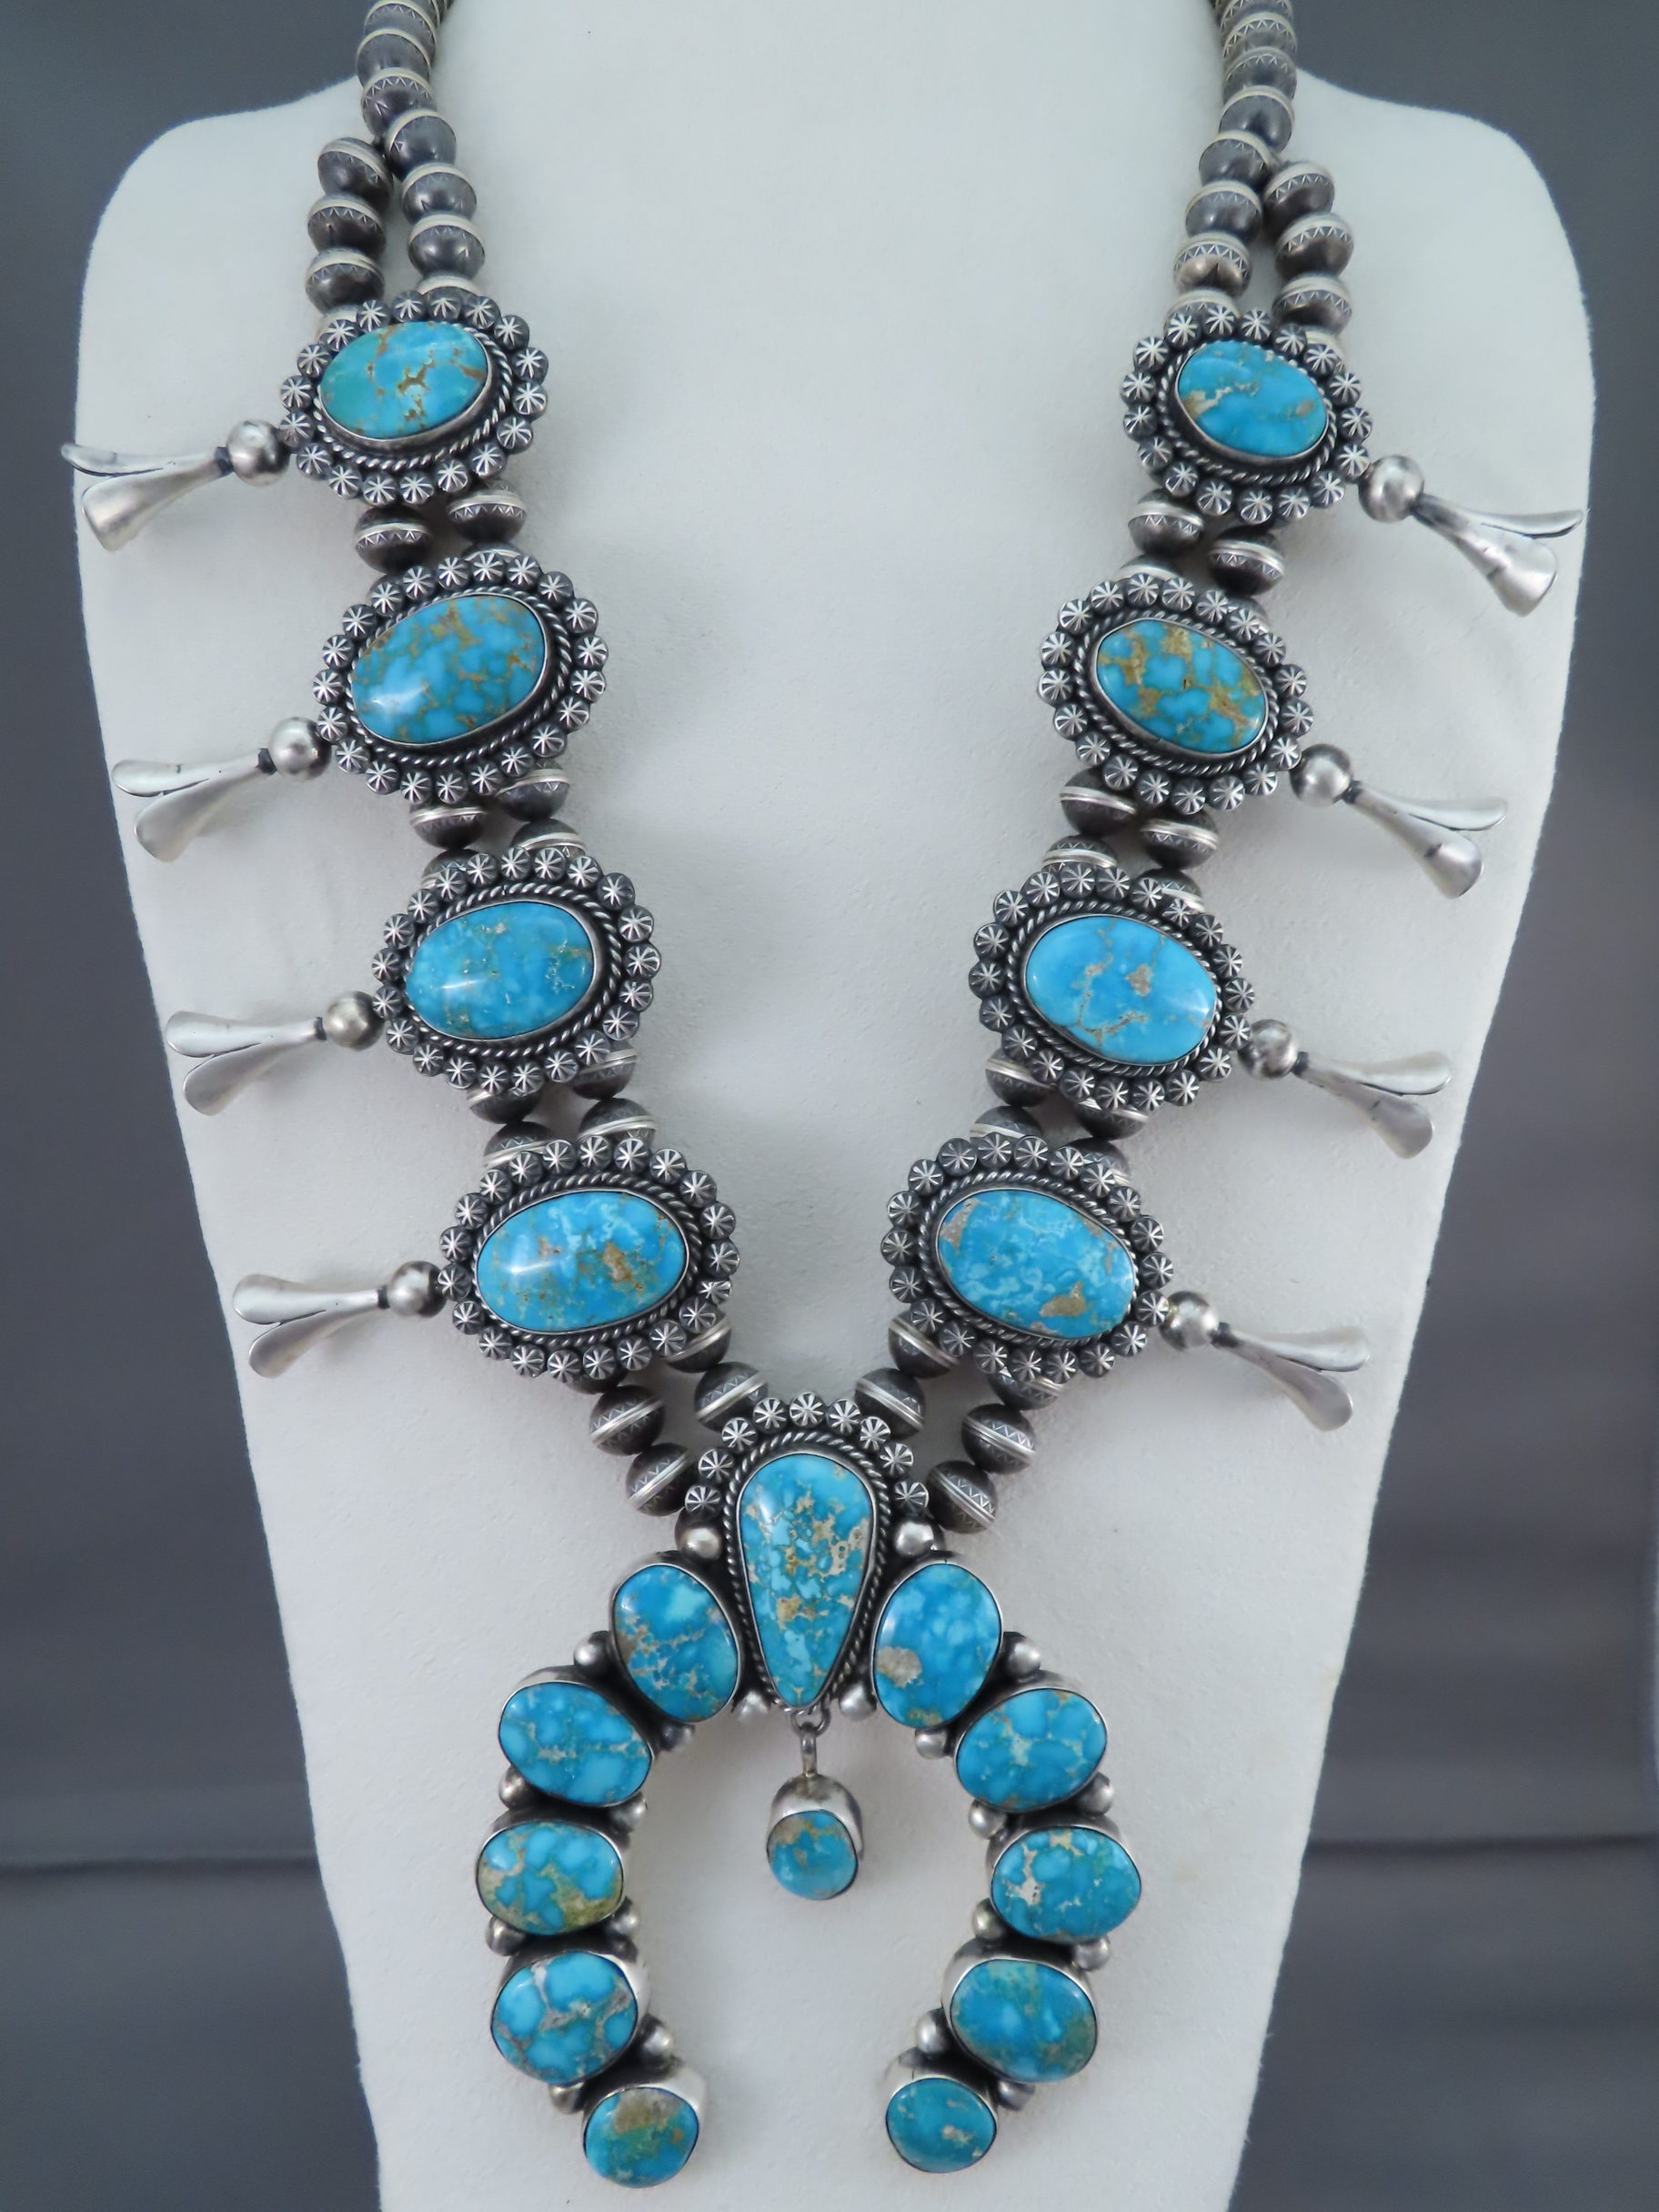 Turquoise Squash Blossom - Blue Sonoran Gold Turquoise Squash Blossom Necklace by Navajo Indian jeweler, Paul Livingston FOR SALE $5,500-